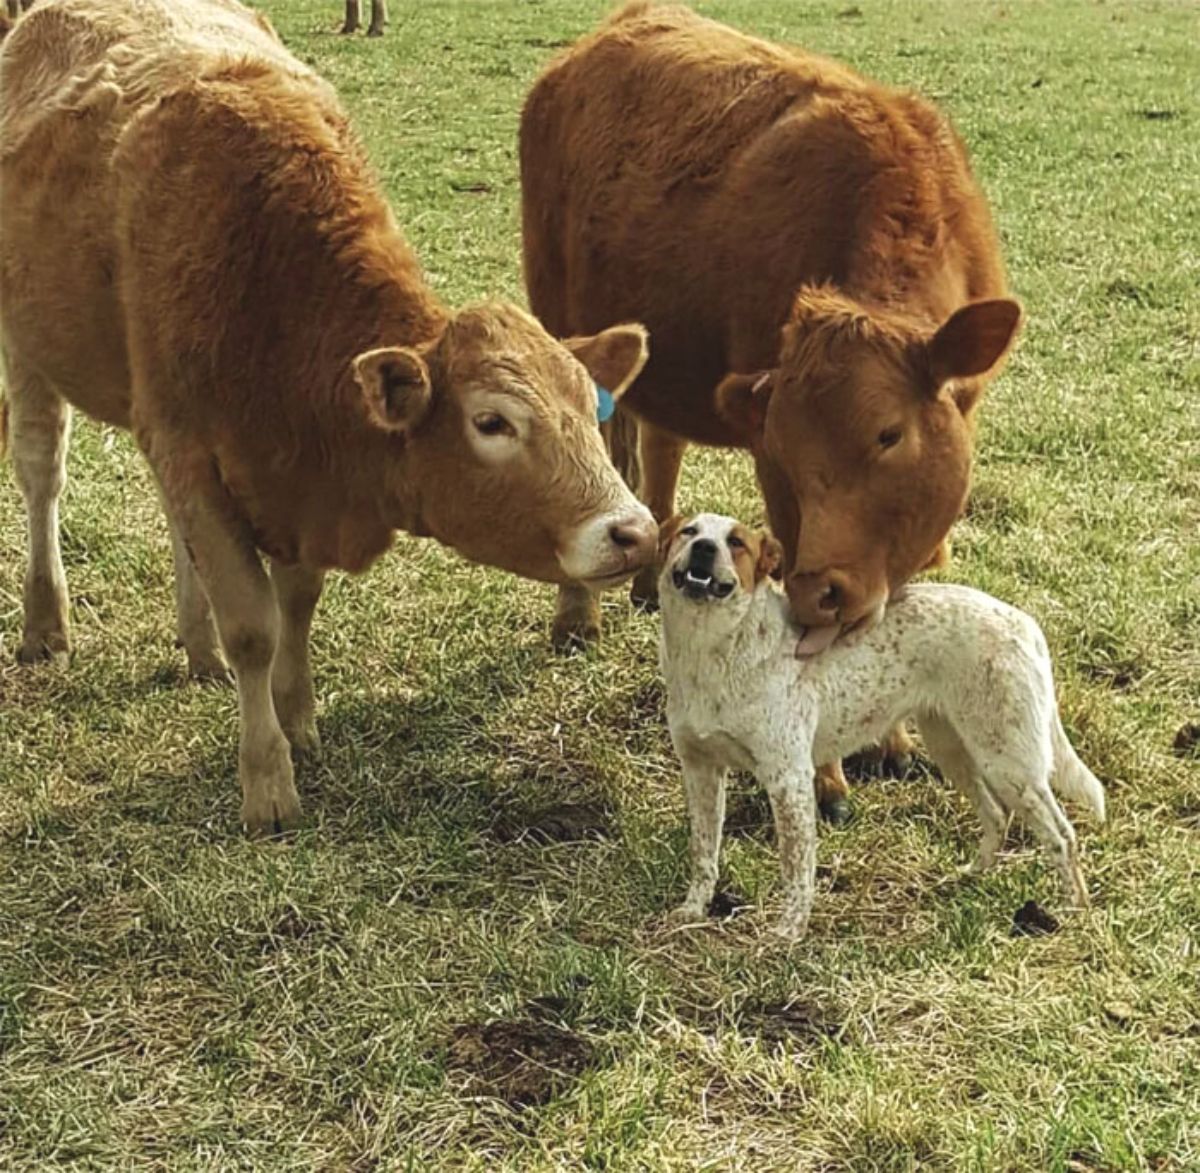 brown cow sniffing a brown and white dog while another brown cow is licking the dog